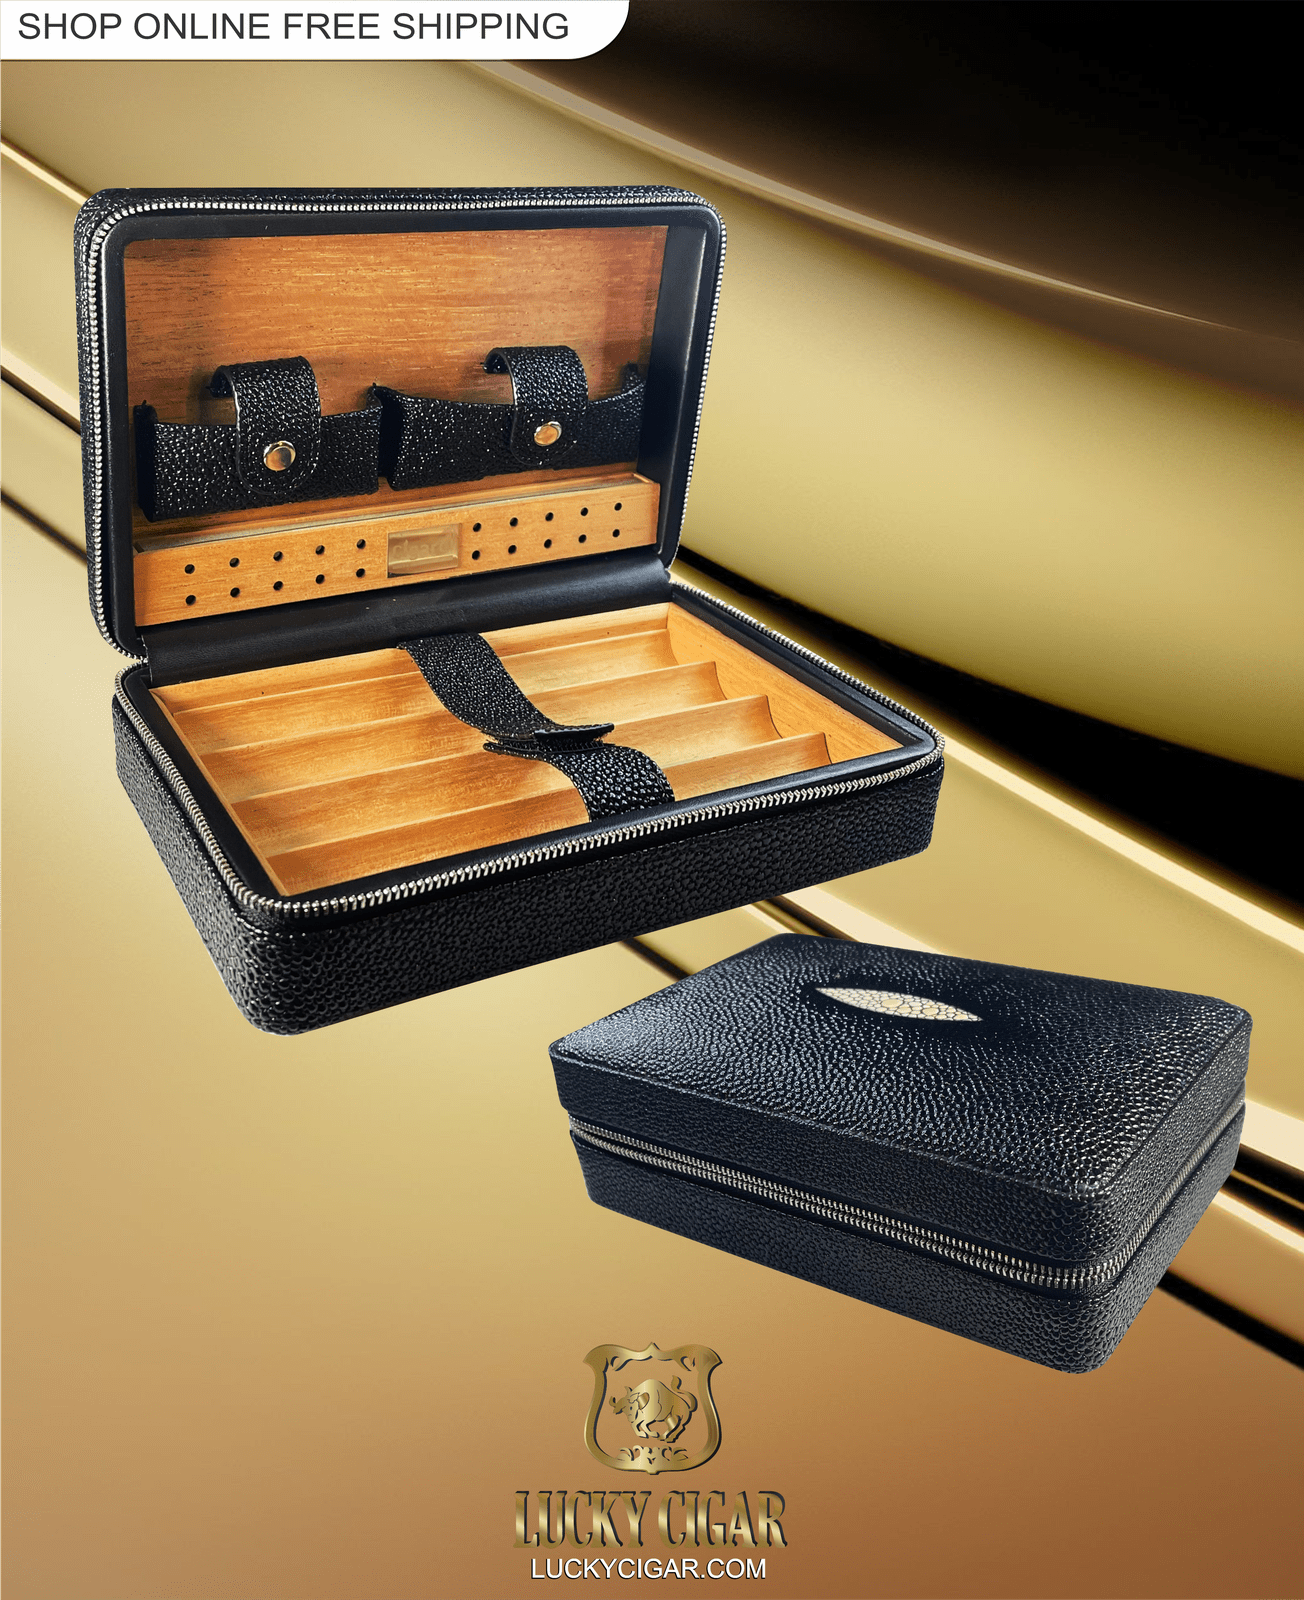 Cigar Lifestyle Accessories: Travel Humidor Case with Zipper for 5 Cigars